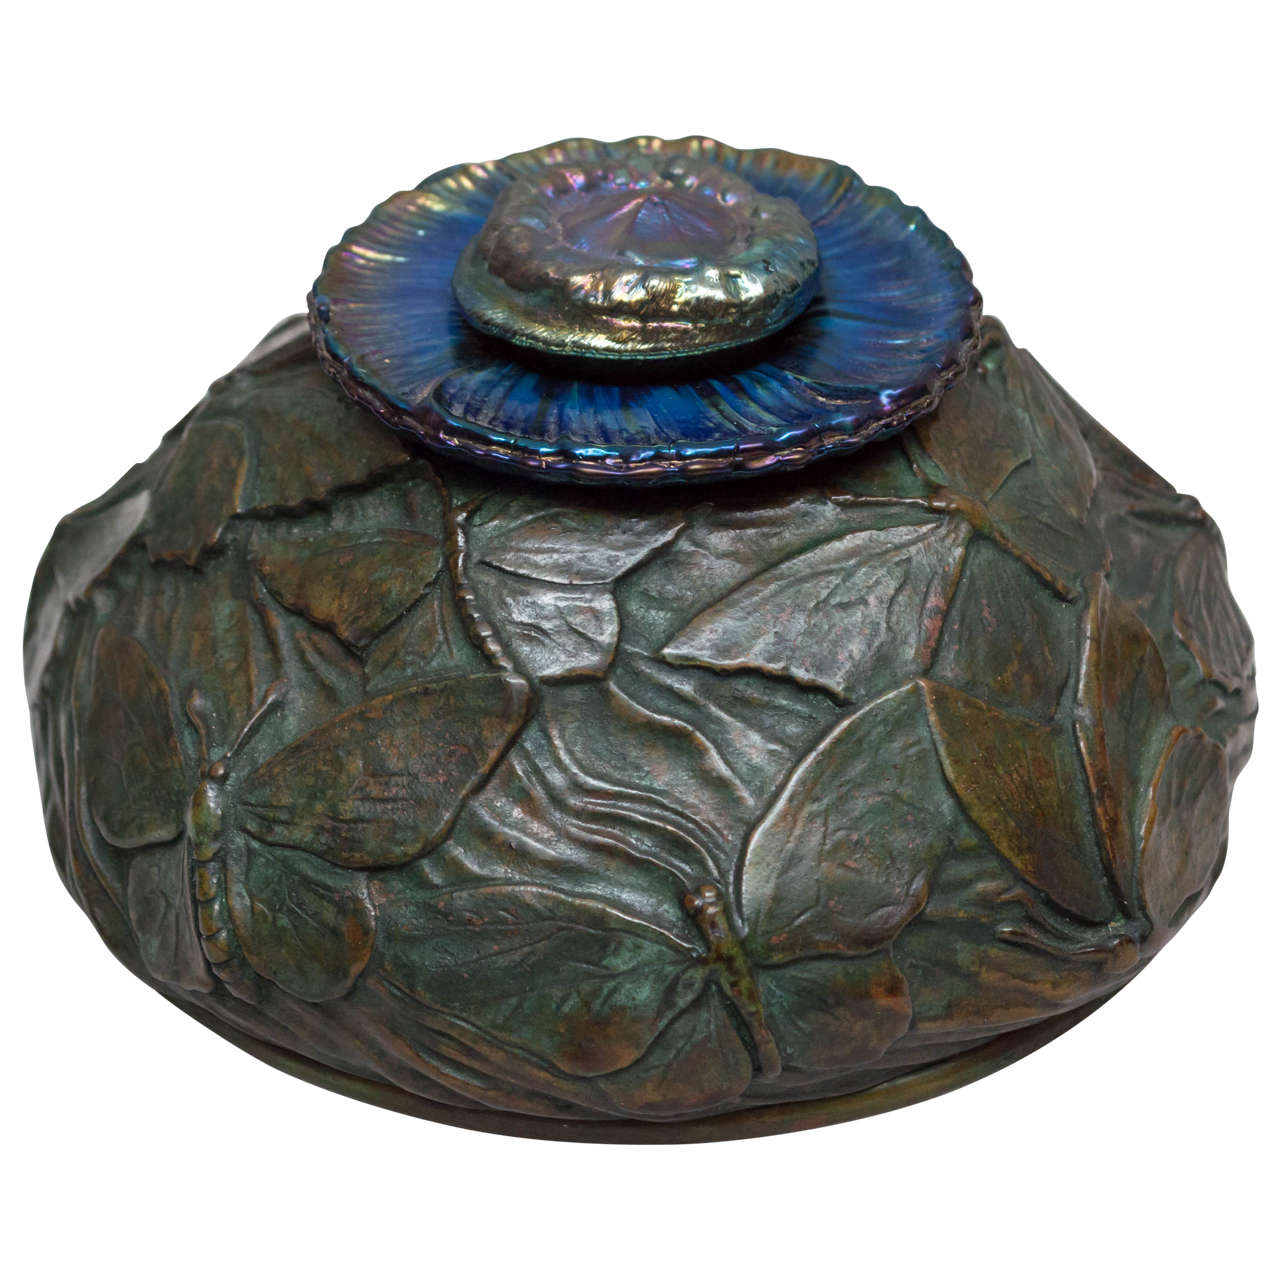 Rare Tiffany Studios Inkwell with Butterflies and Blue Glass Insert